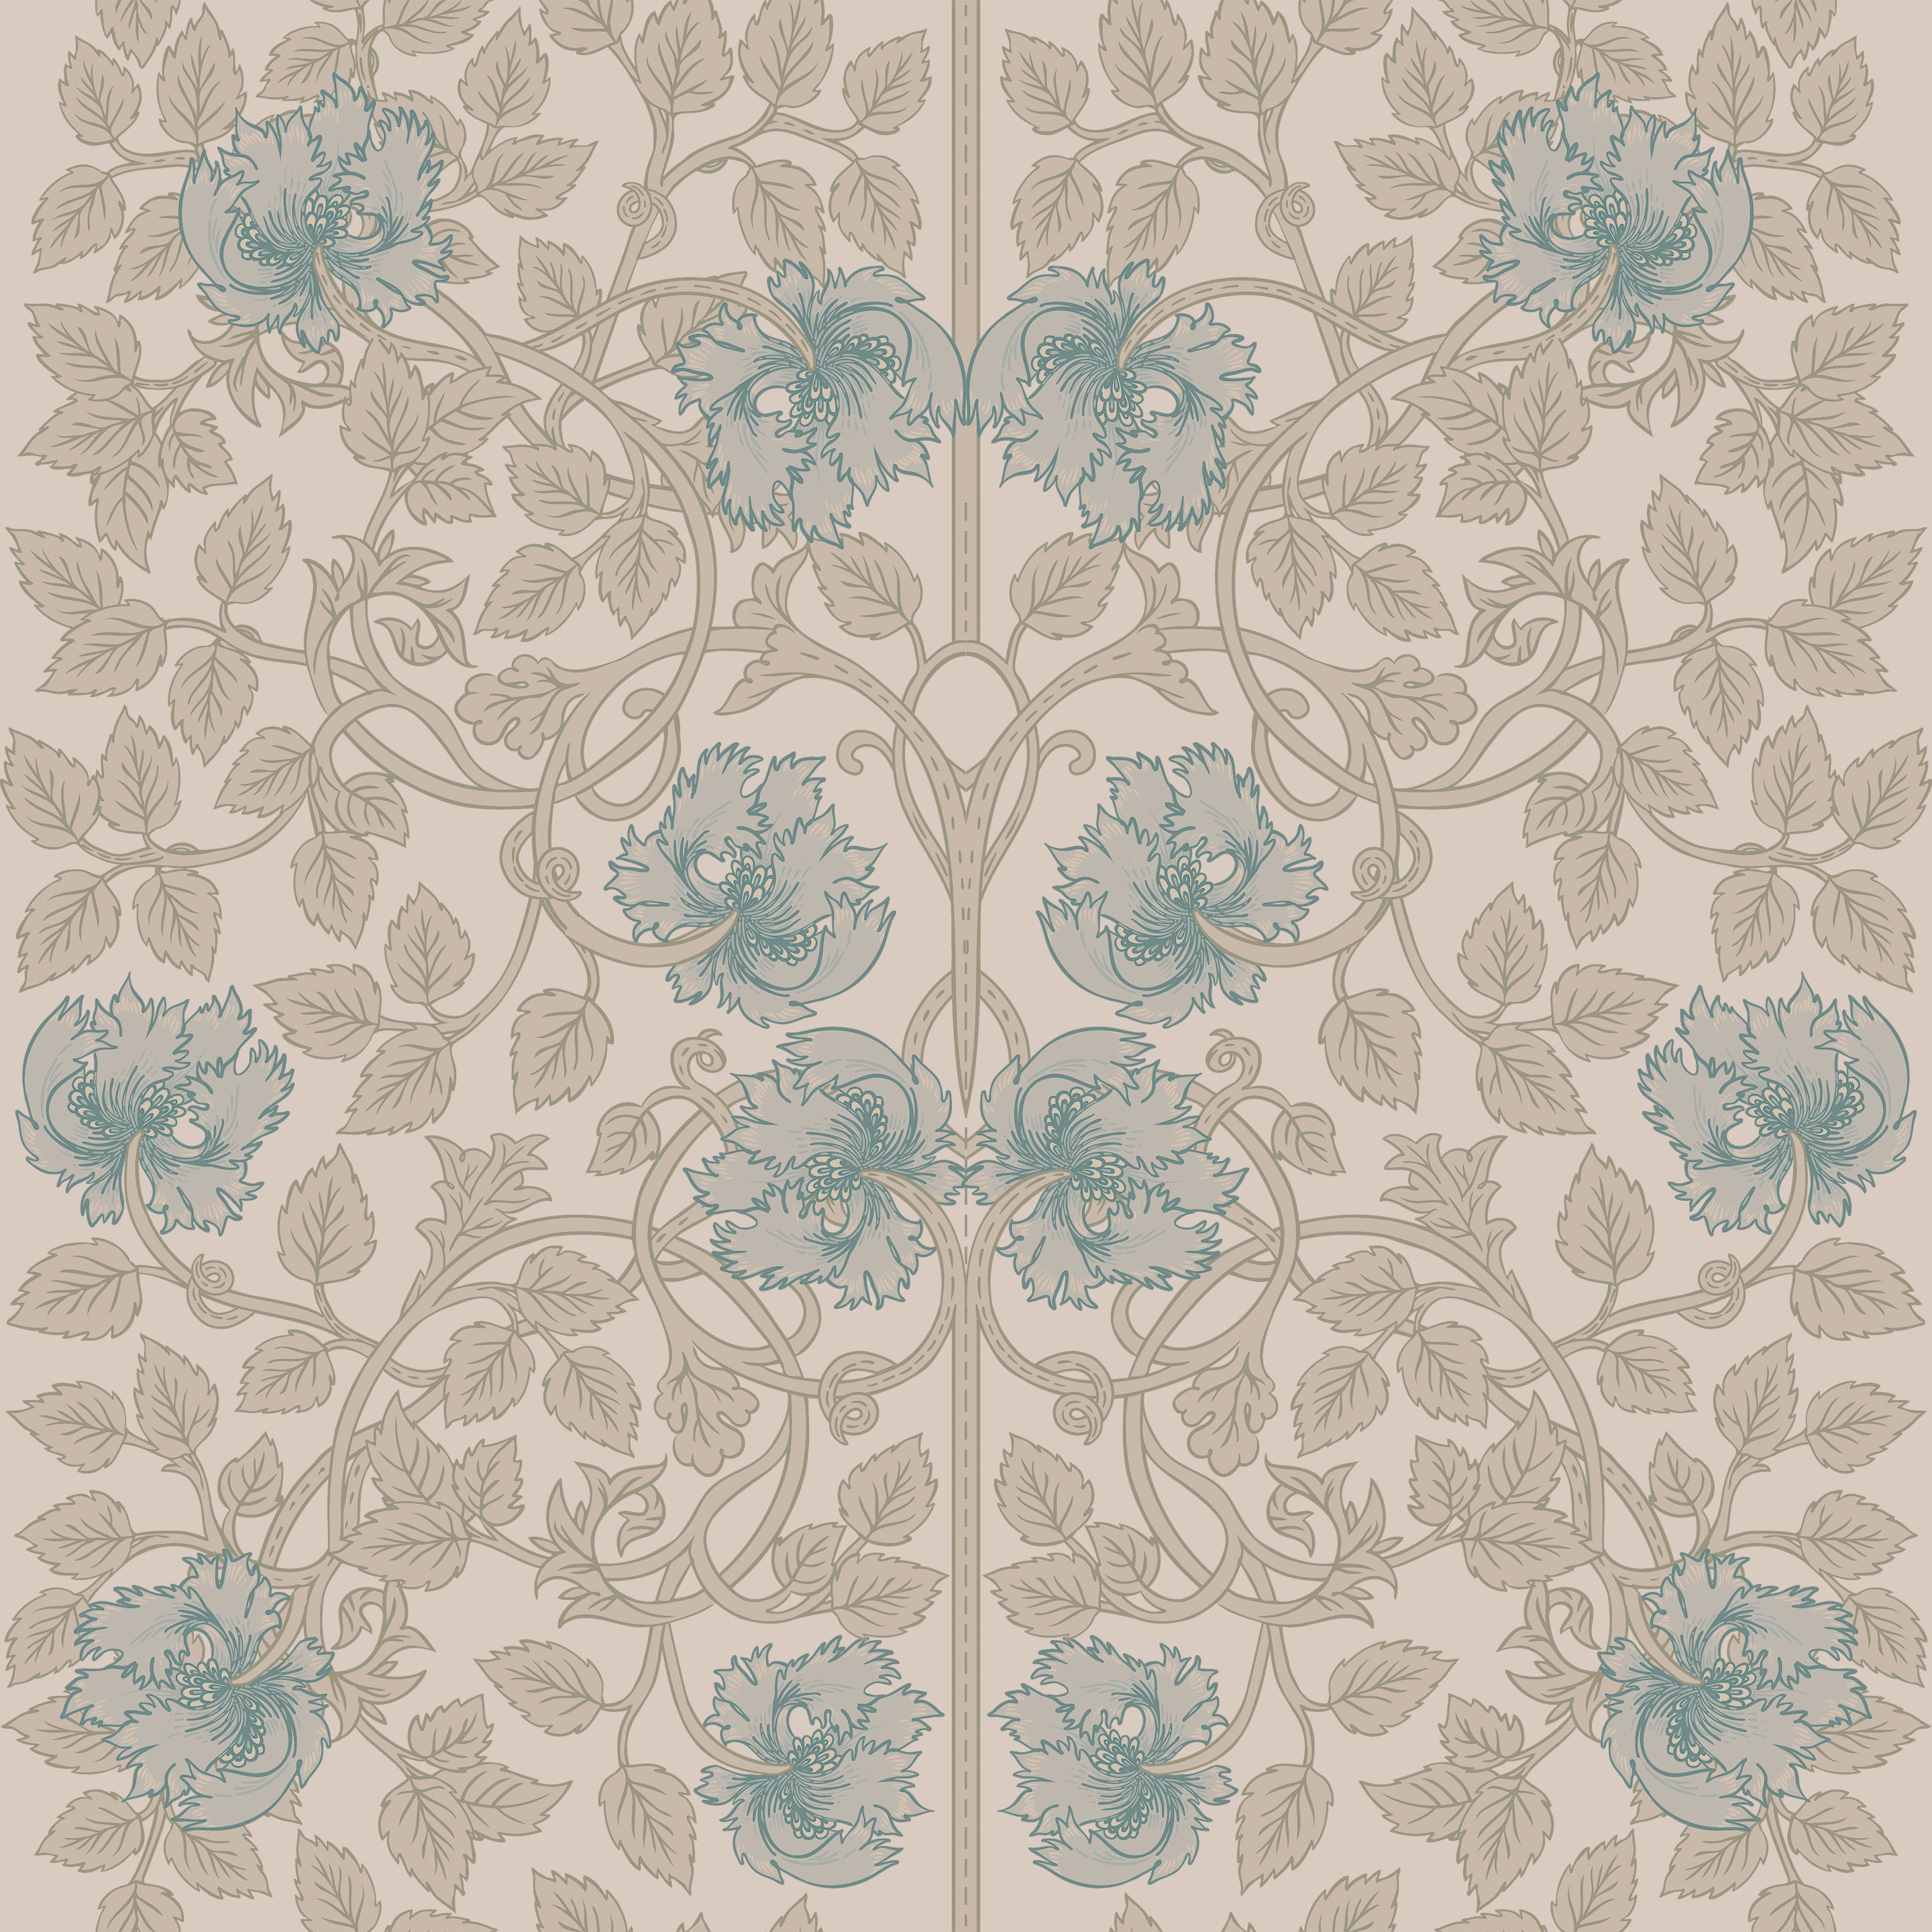 Detailed close-up of Color Burn Damask Wallpaper, showcasing intricate floral patterns in teal and beige hues, with a classic damask design that blends ornate leaves and florals.